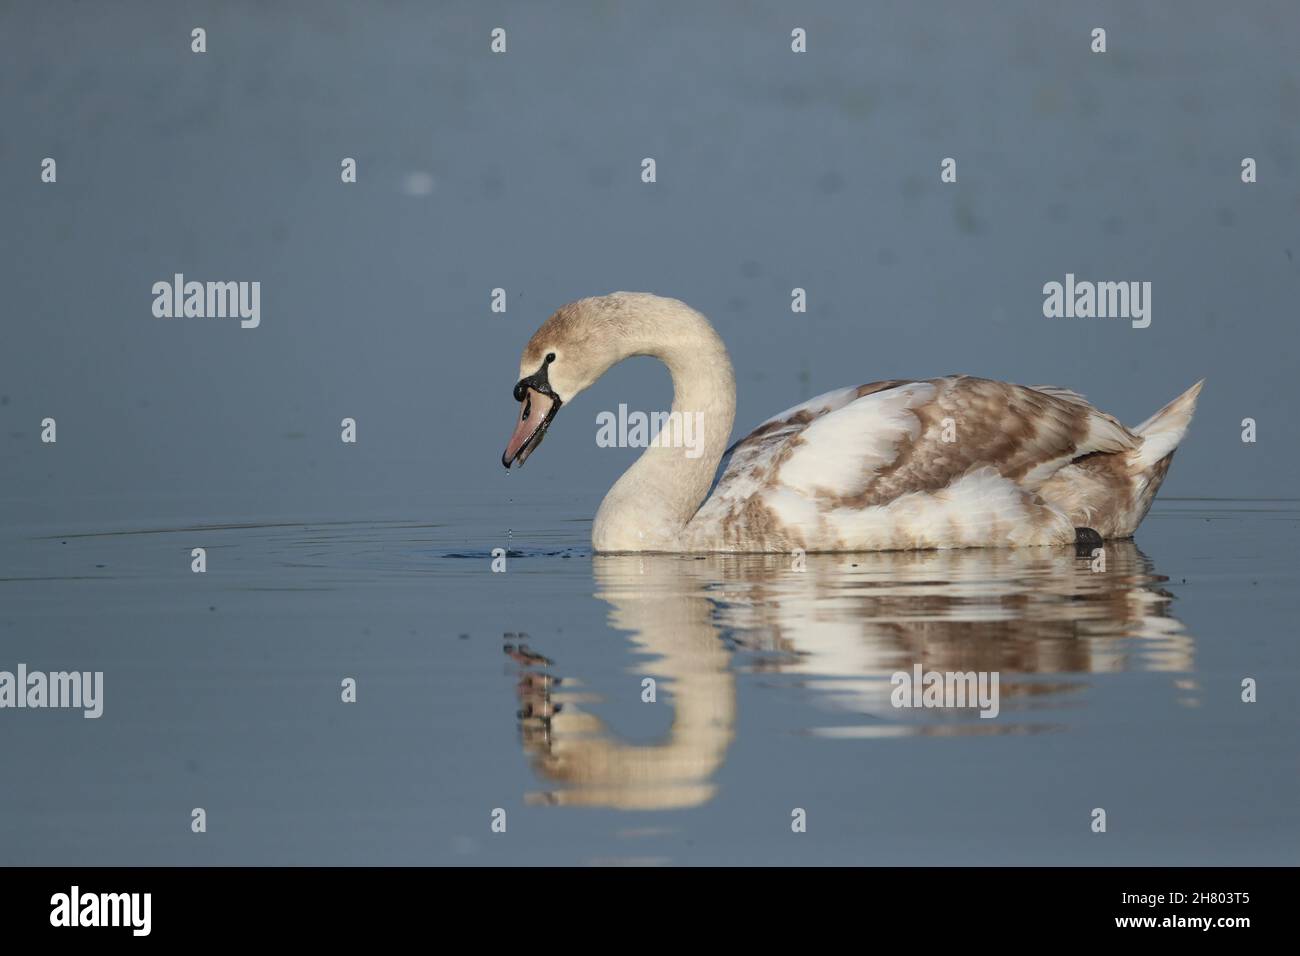 Sub-adult mute swan on a flooded field where food is easily accessible by its feeding underwater by stretching its neck. Stock Photo